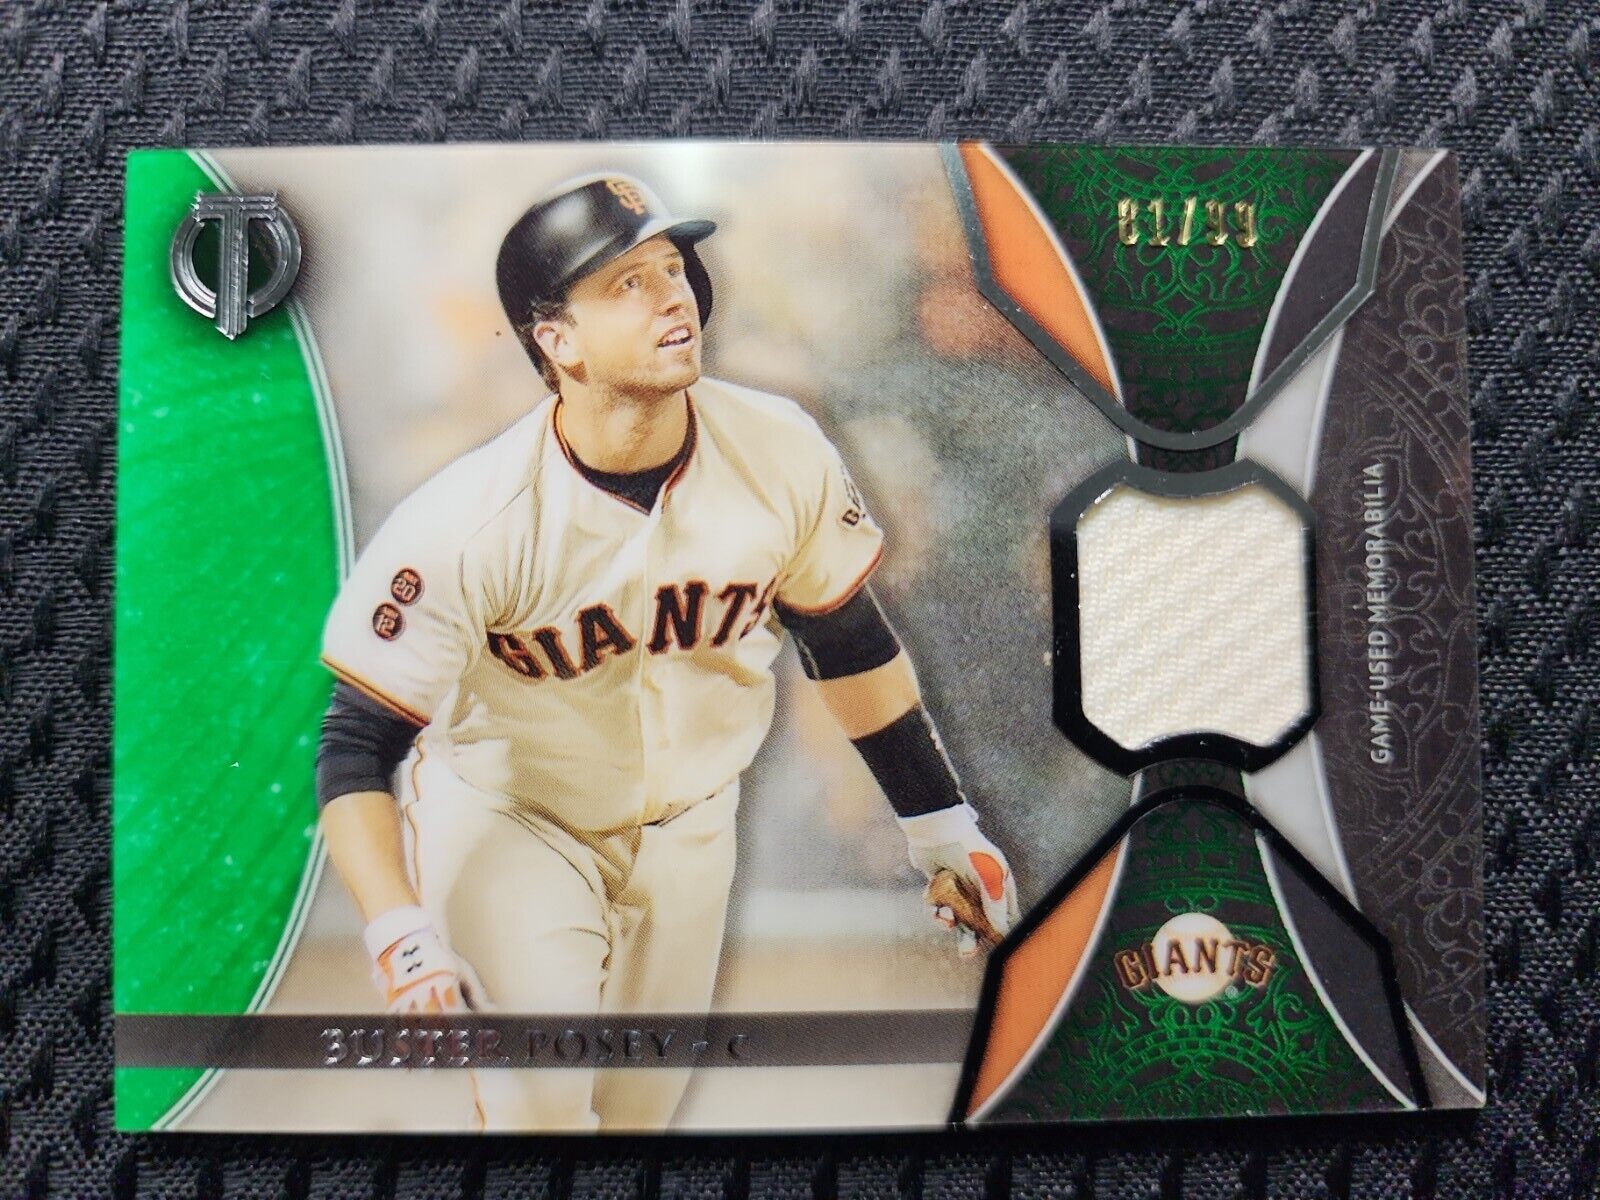 buster posey game used jersey